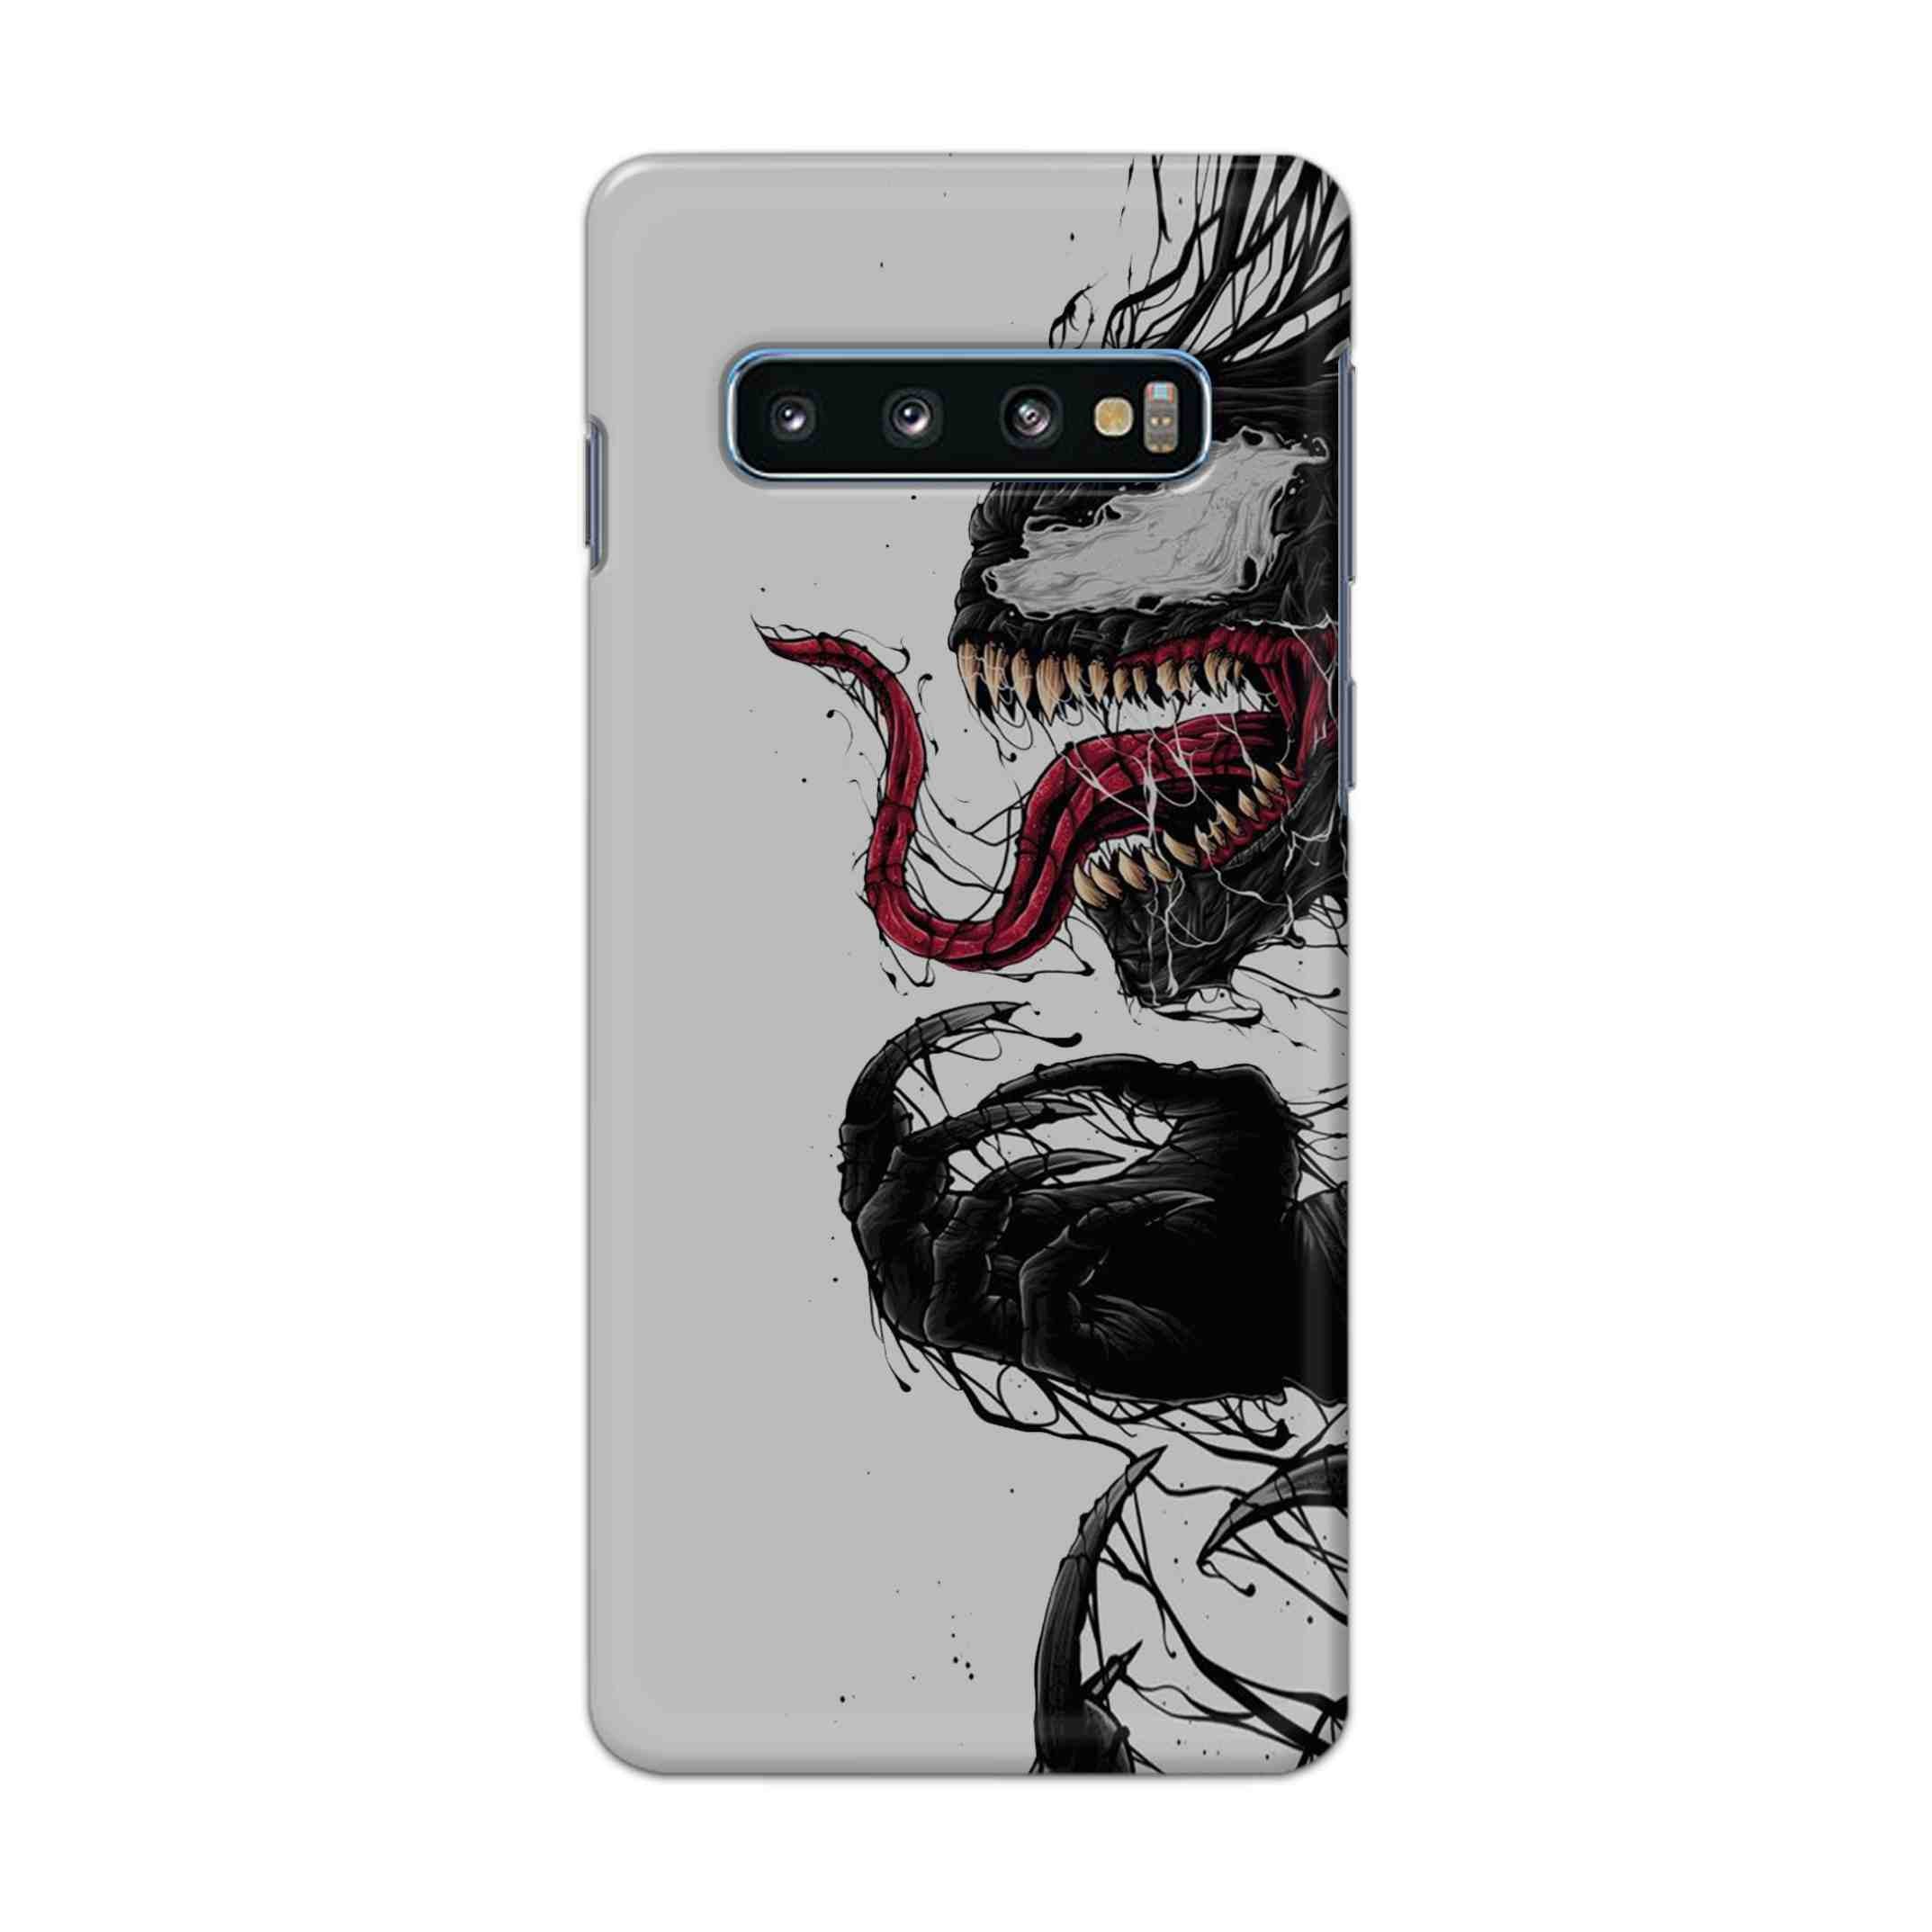 Buy Venom Crazy Hard Back Mobile Phone Case Cover For Samsung Galaxy S10 Plus Online